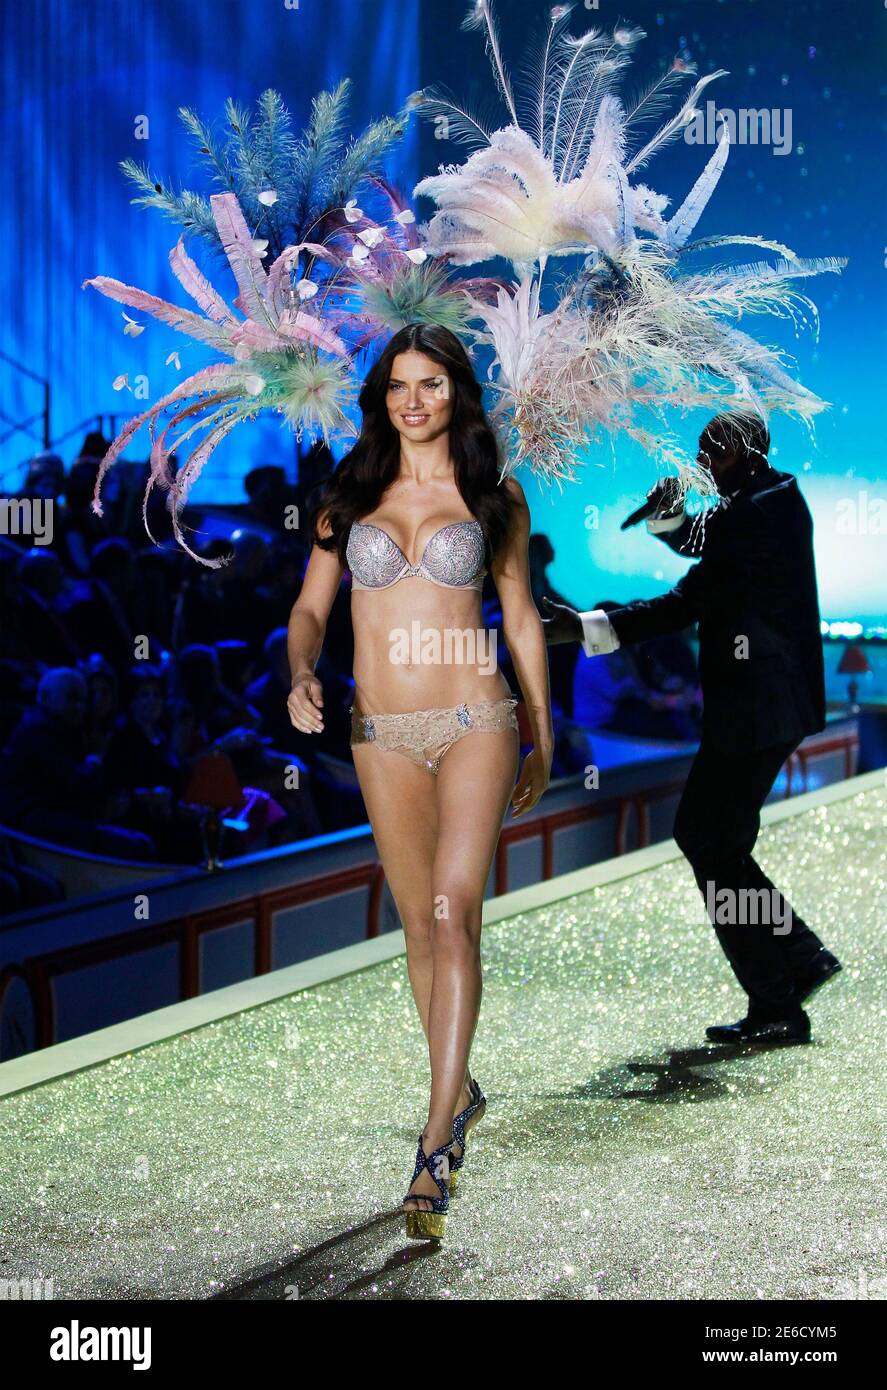 Model Adriana Lima presents the Bombshell Fantasy Bra designed by Damiani  Jewellers during the Victoria's Secret Fashion Show at the Lexington Armory  in New York November 10, 2010. The one-of-a-kind bra is